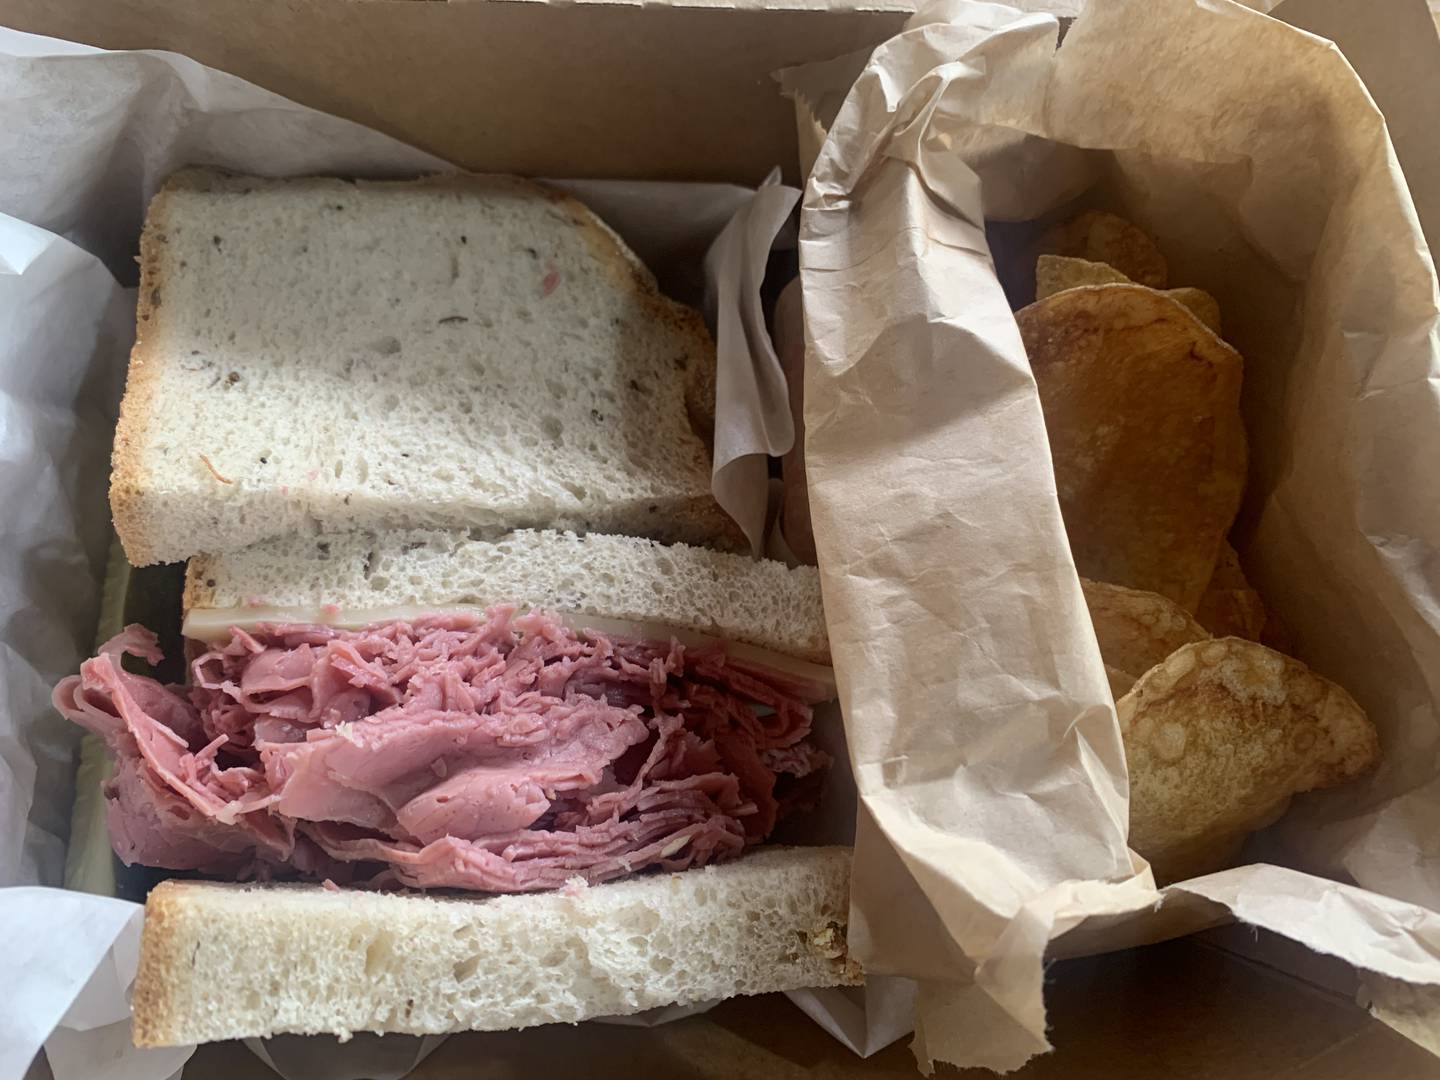 The Tom & Jerry Combo at the Corned Beef Factory in Woodstock comes with corned beef, pastrami and Swiss cheese on rye bread.